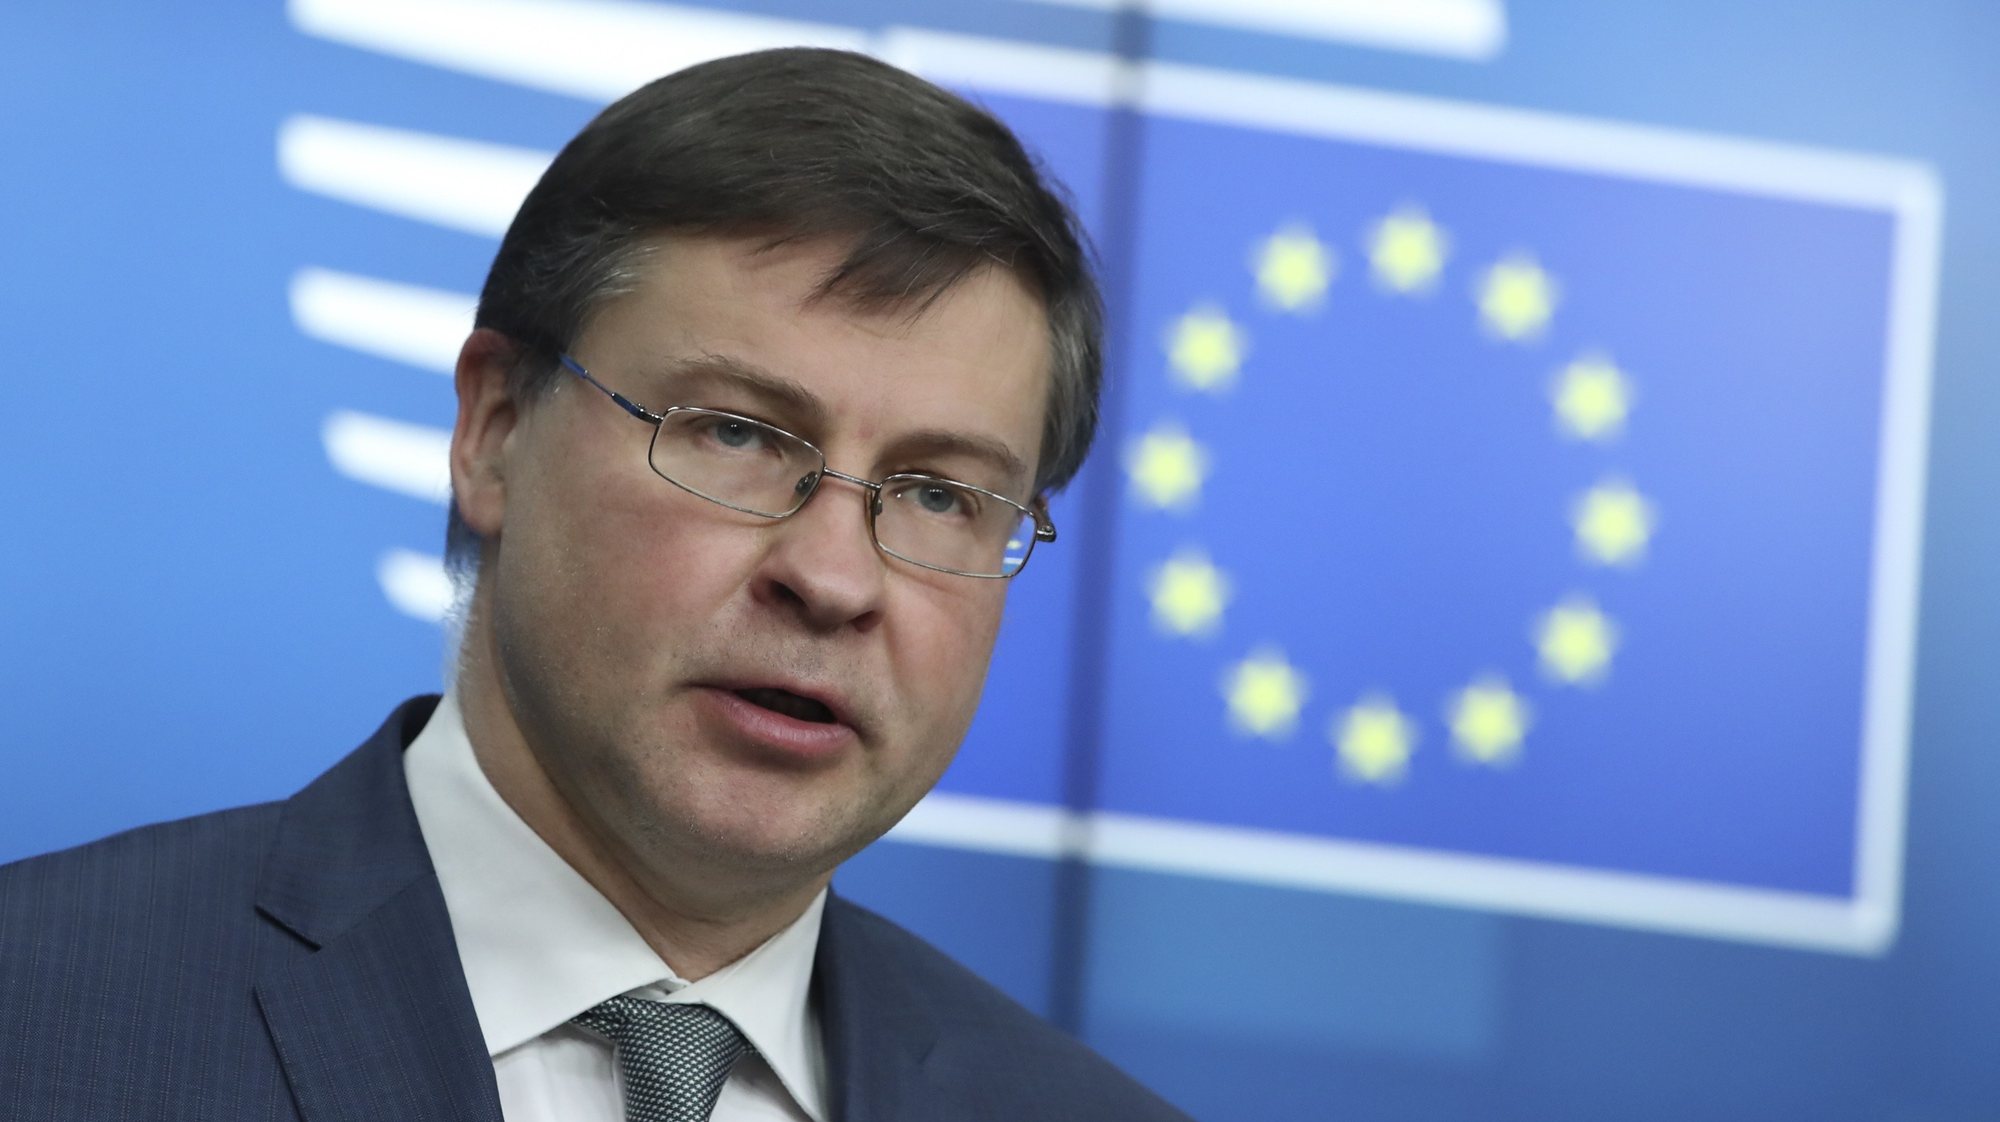 epa09077911 European Commission Vice-President Valdis Dombrovskis speaks during a news conference following a European Union finance ministers meeting in Brussels, Belgium, 16 March 2021.  EPA/YVES HERMAN / POOL